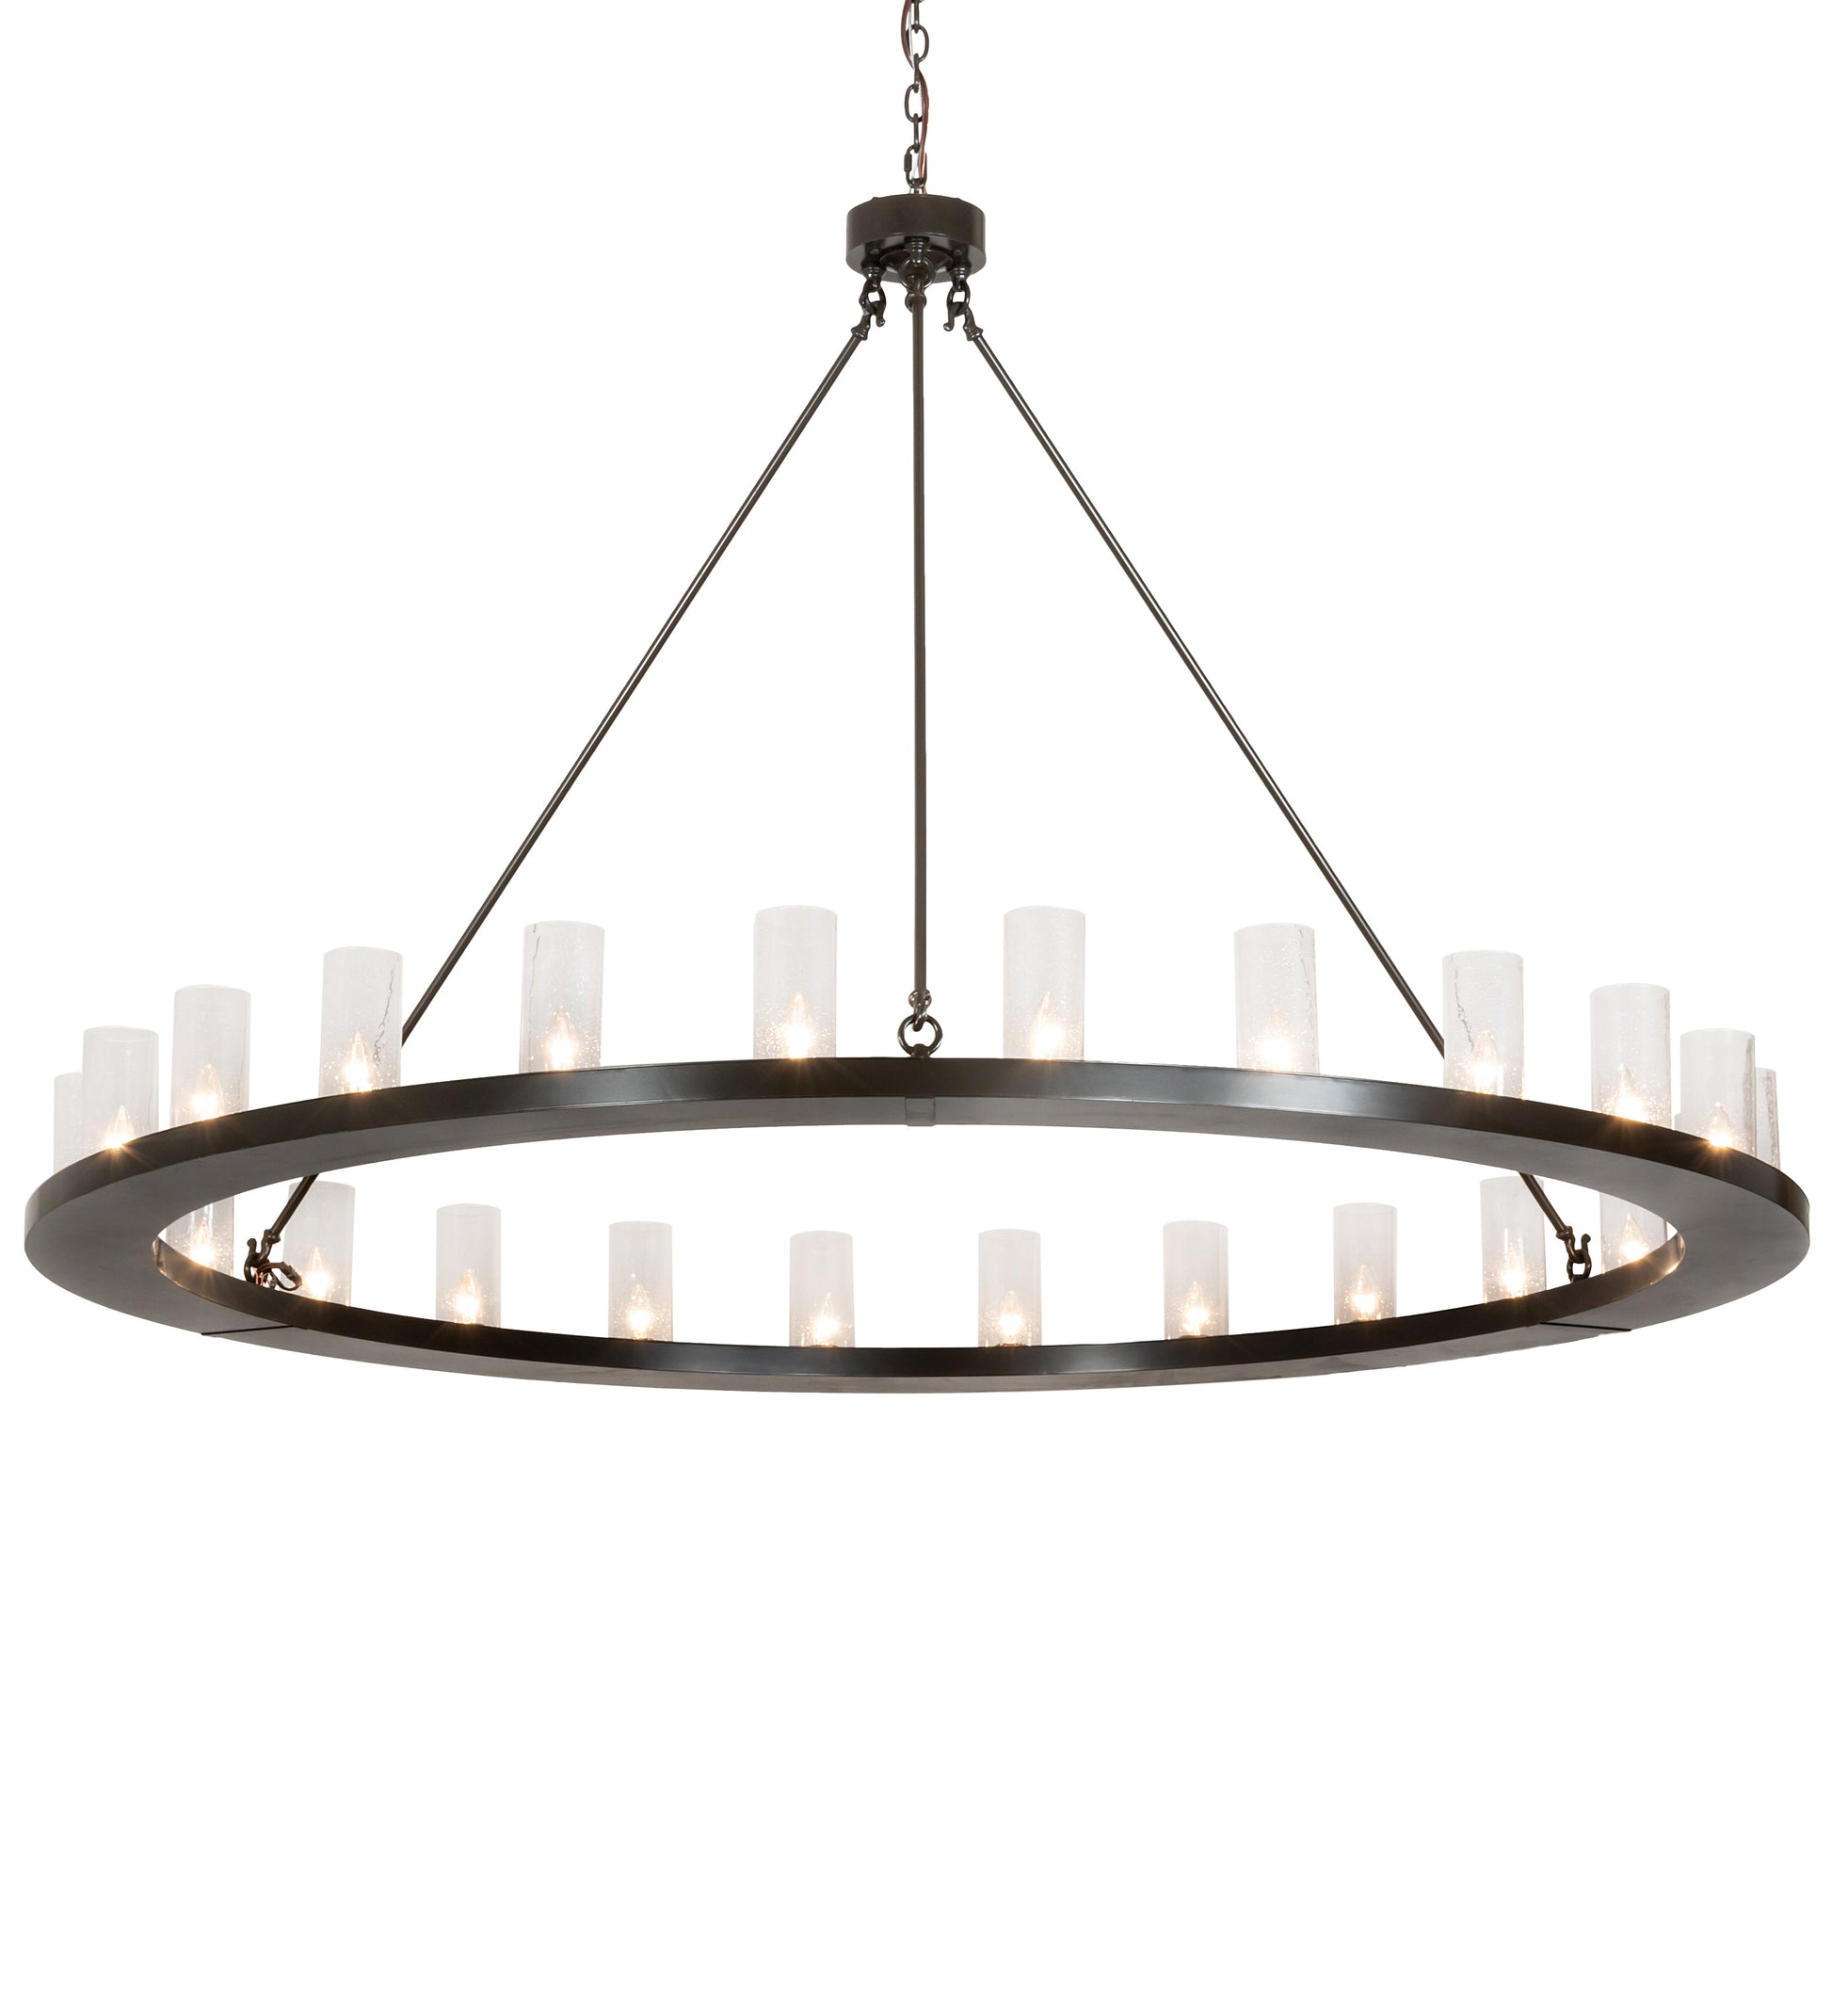 72" Loxley 24-Light Chandelier by 2nd Ave Lighting